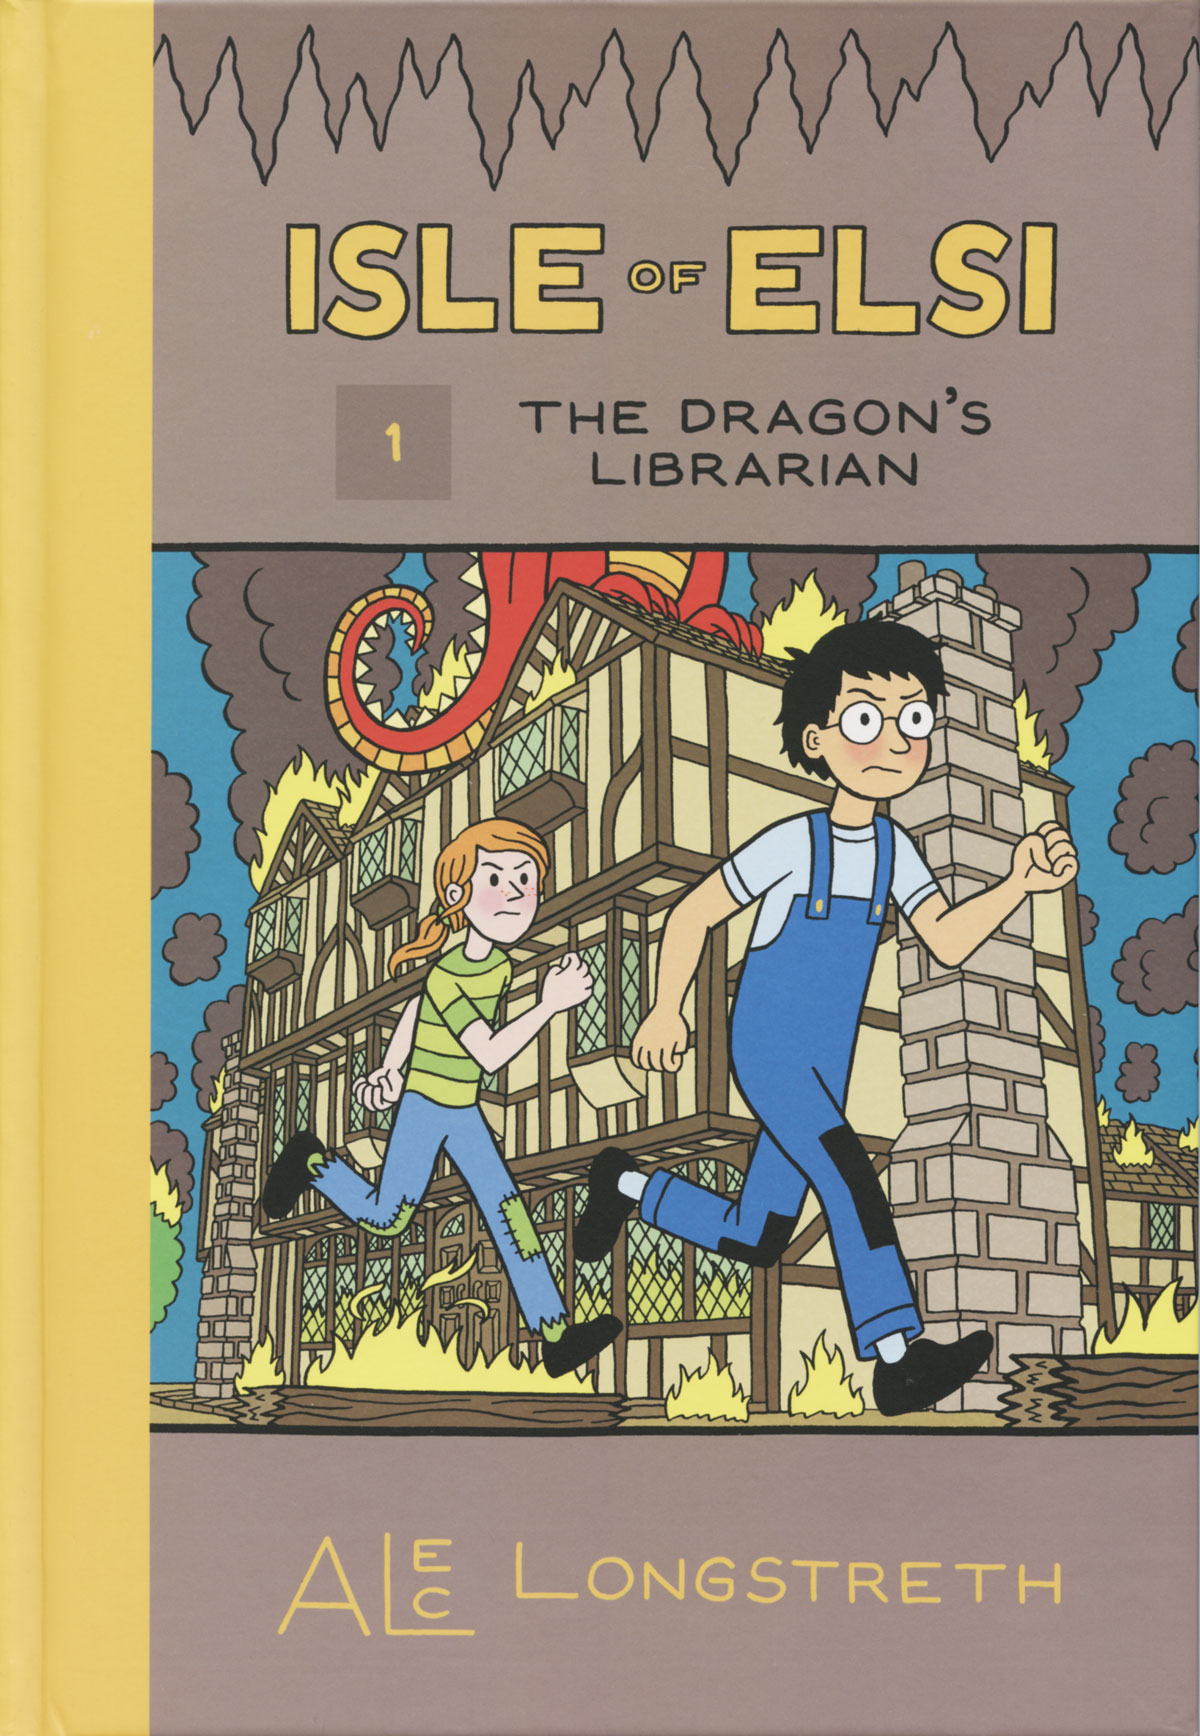 Isle of Elsi Volume 1 The Dragon's Librarian